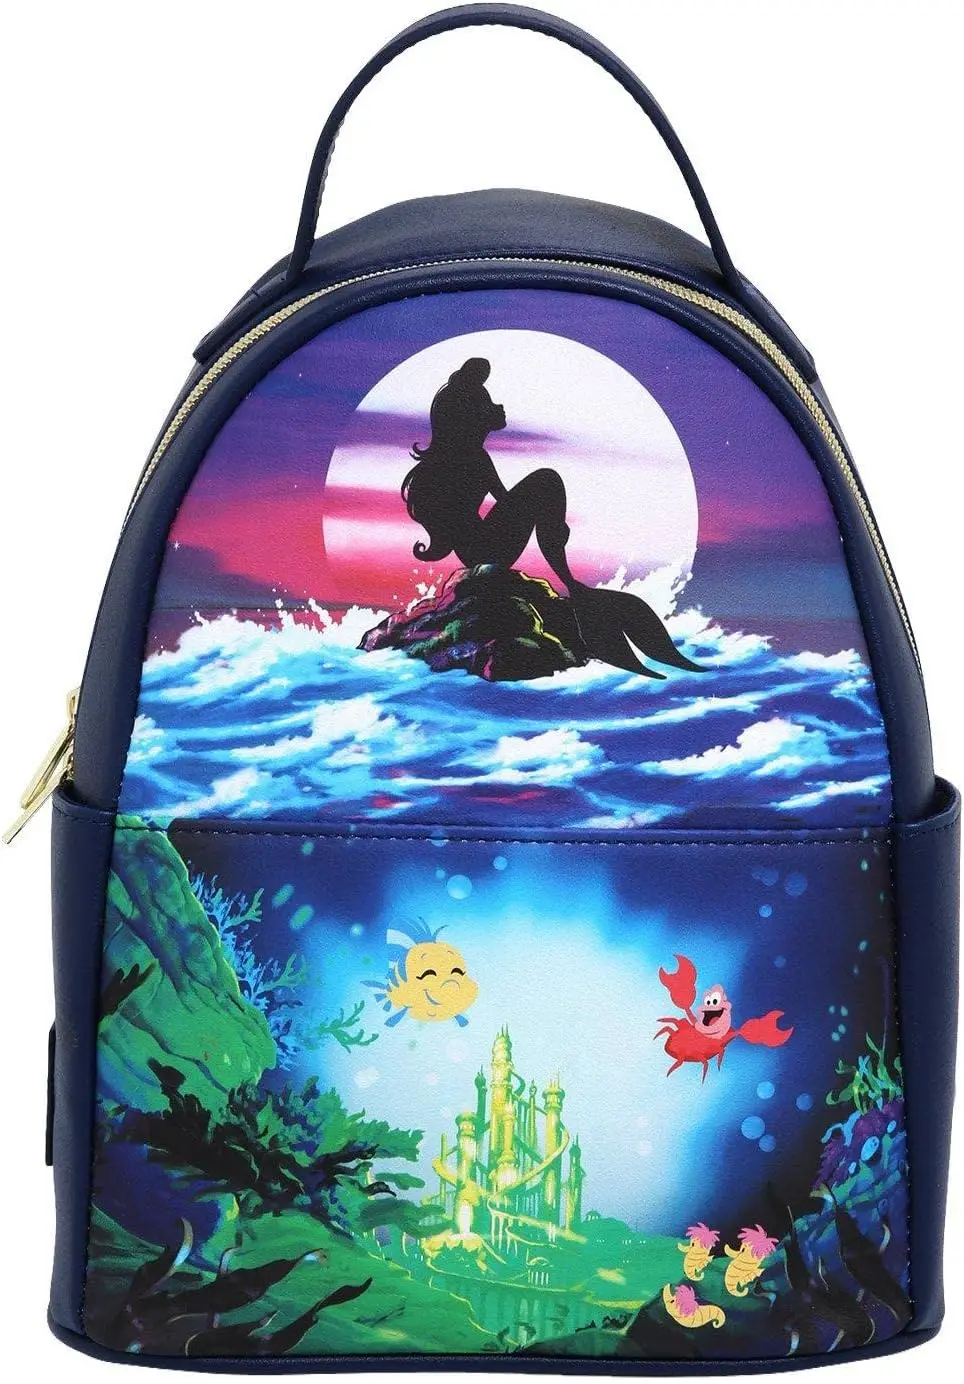 

Little Silhouette Mini Backpack - Hot Topic Exclusive Navy Blue 14700529 Cooler bag кемпінгові товари Lunch bag